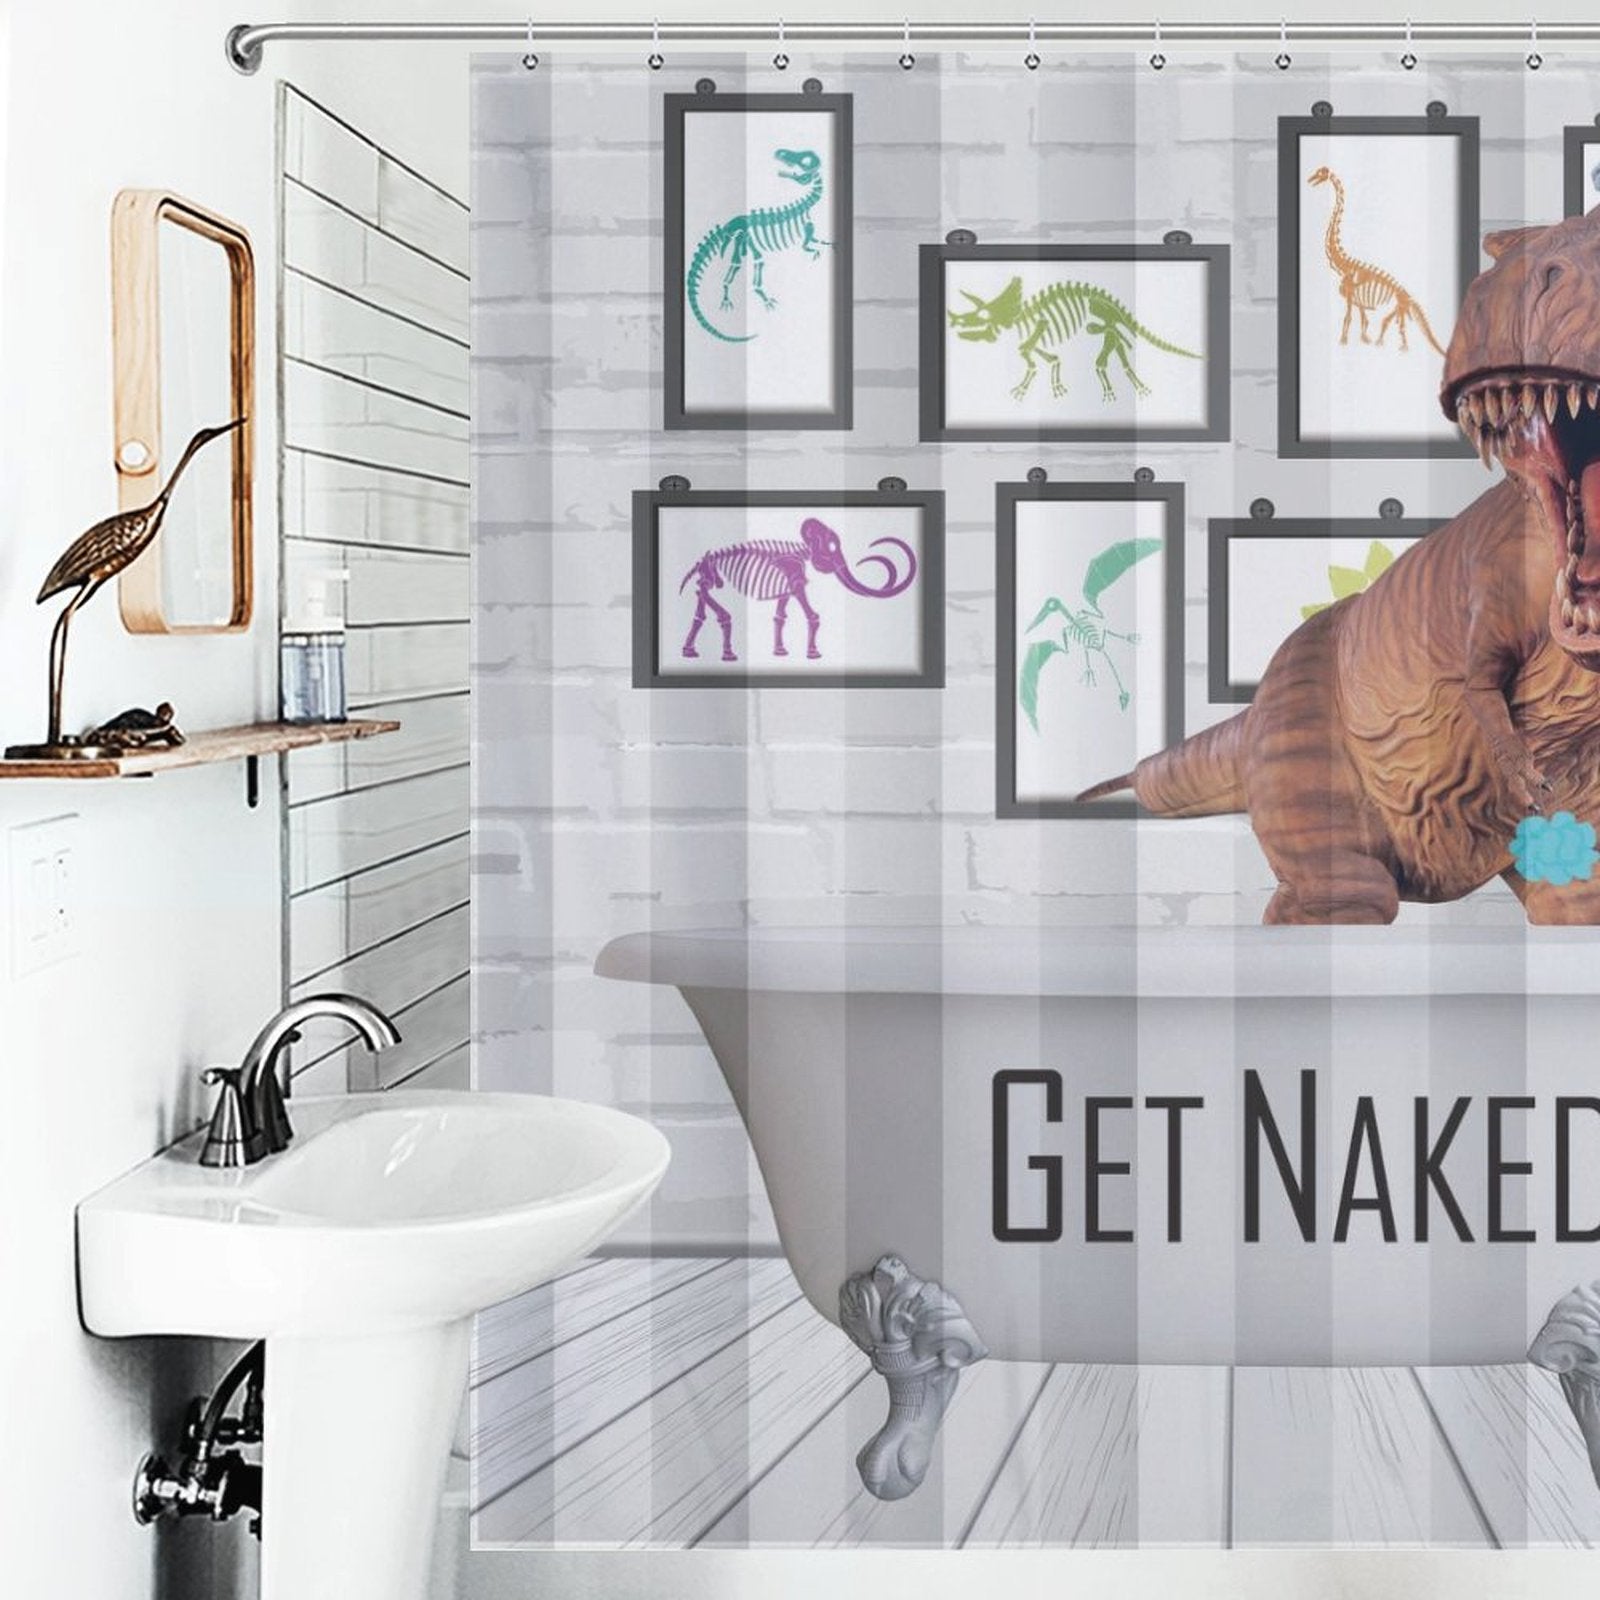 A bathroom with a sink, a framed mirror, and a Funny Dinosaur Get Naked Shower Curtain-Cottoncat displaying "Get Naked." There's also part of a T-Rex model visible on the right side, making this waterproof bathroom decor both amusing and practical.